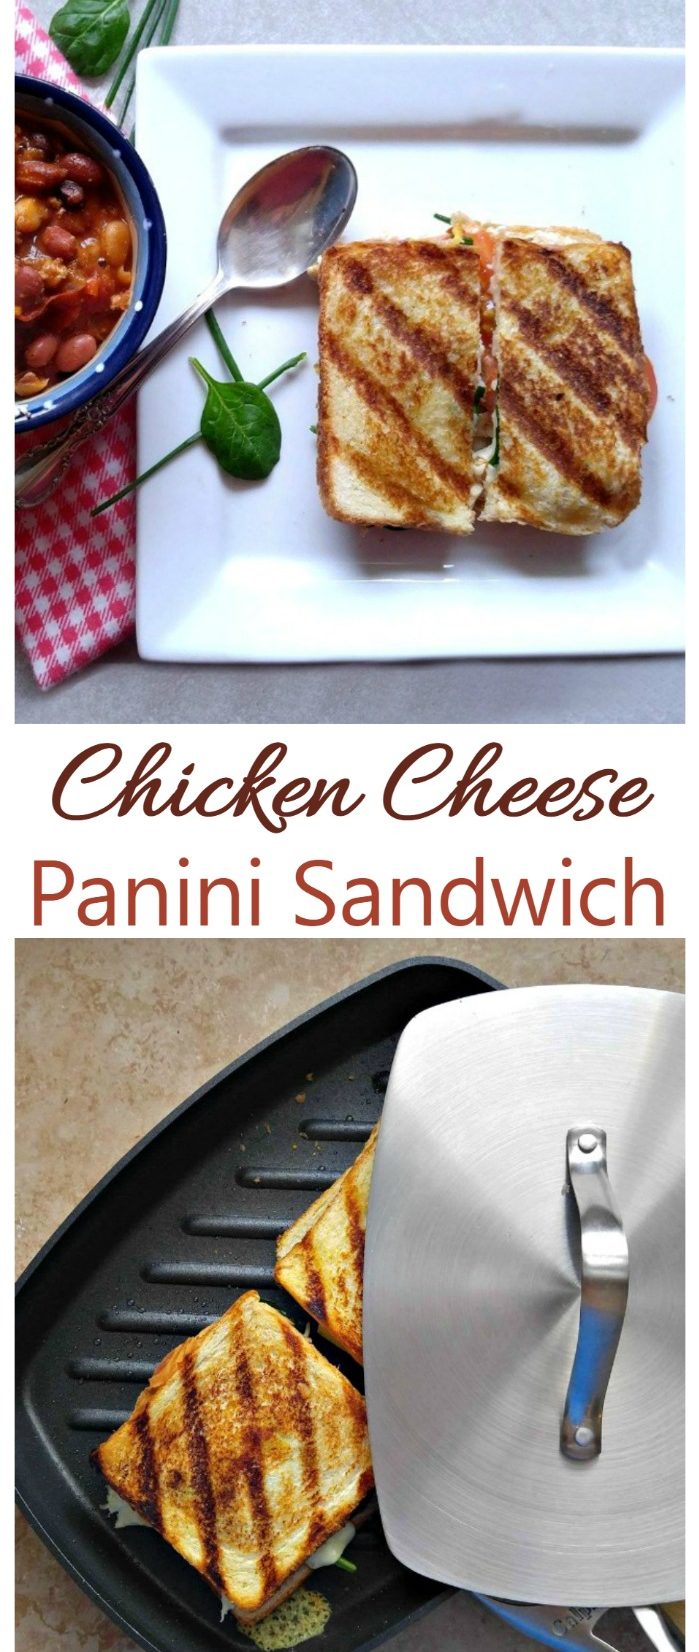 Chicken Cheese Panini Sandwich - Slimmed Down Lunch Delight